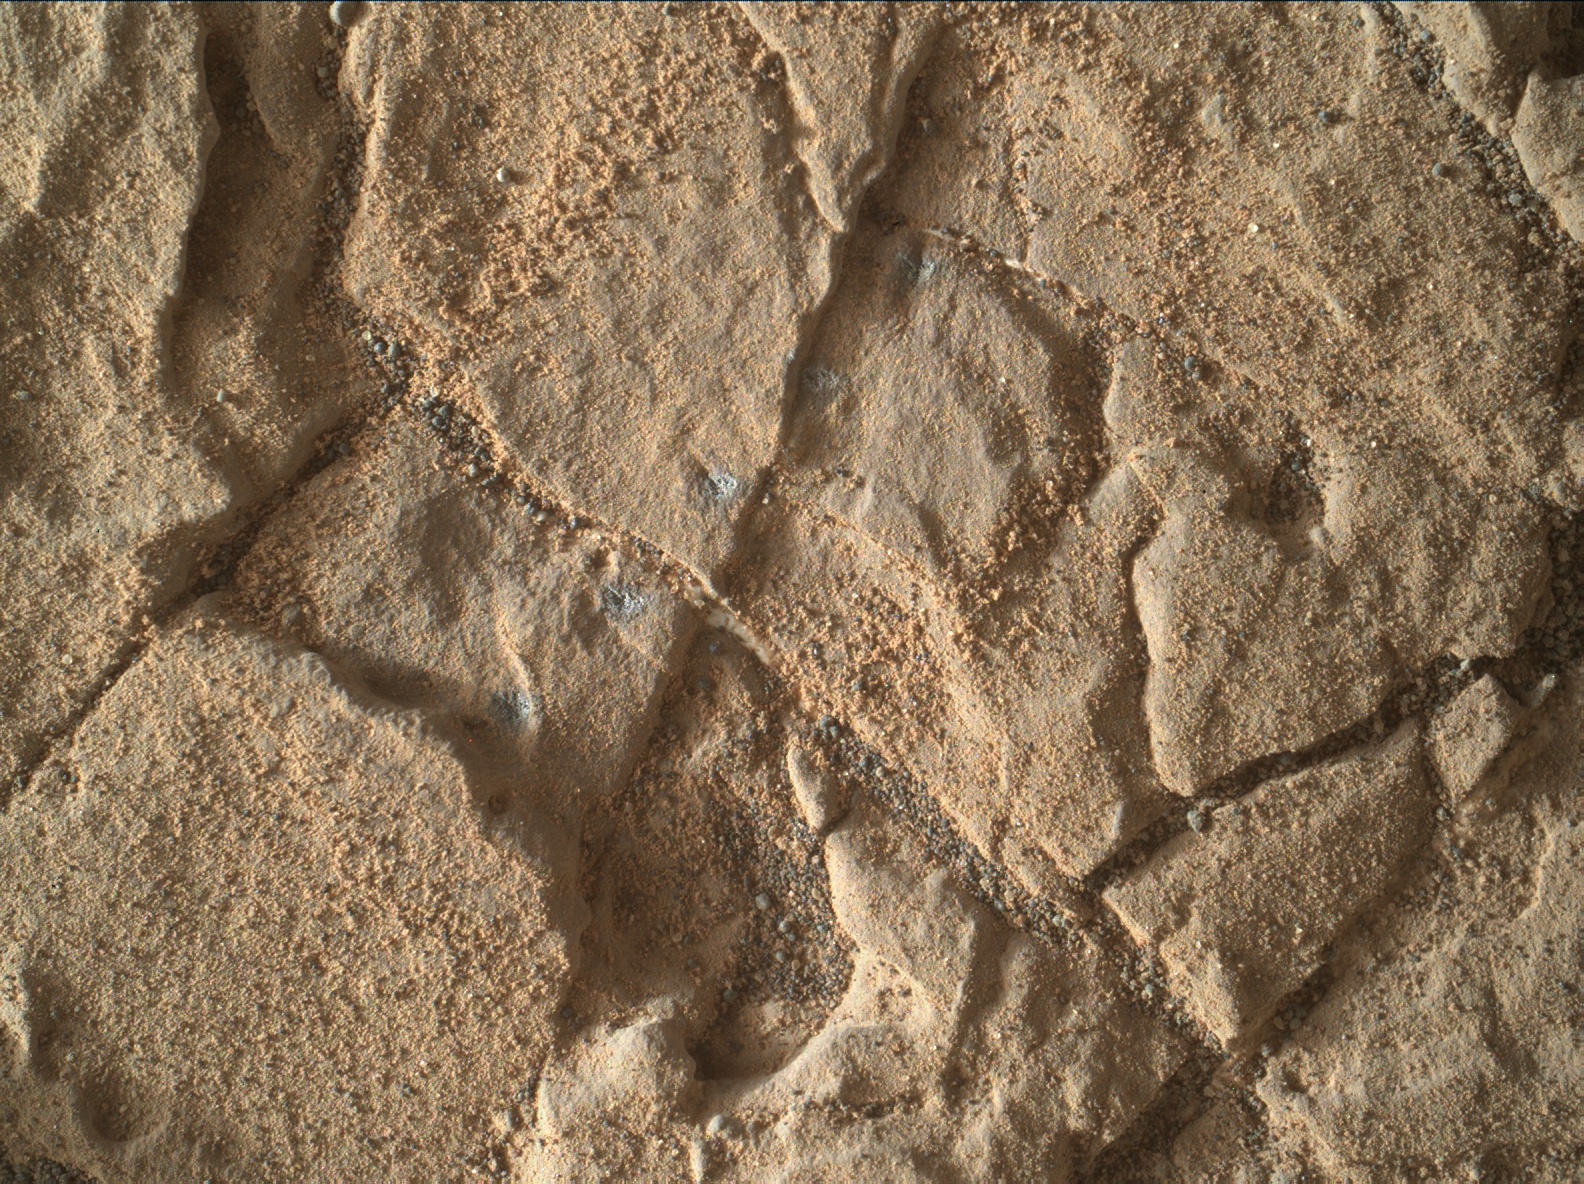 Nasa's Mars rover Curiosity acquired this image using its Mars Hand Lens Imager (MAHLI) on Sol 1940